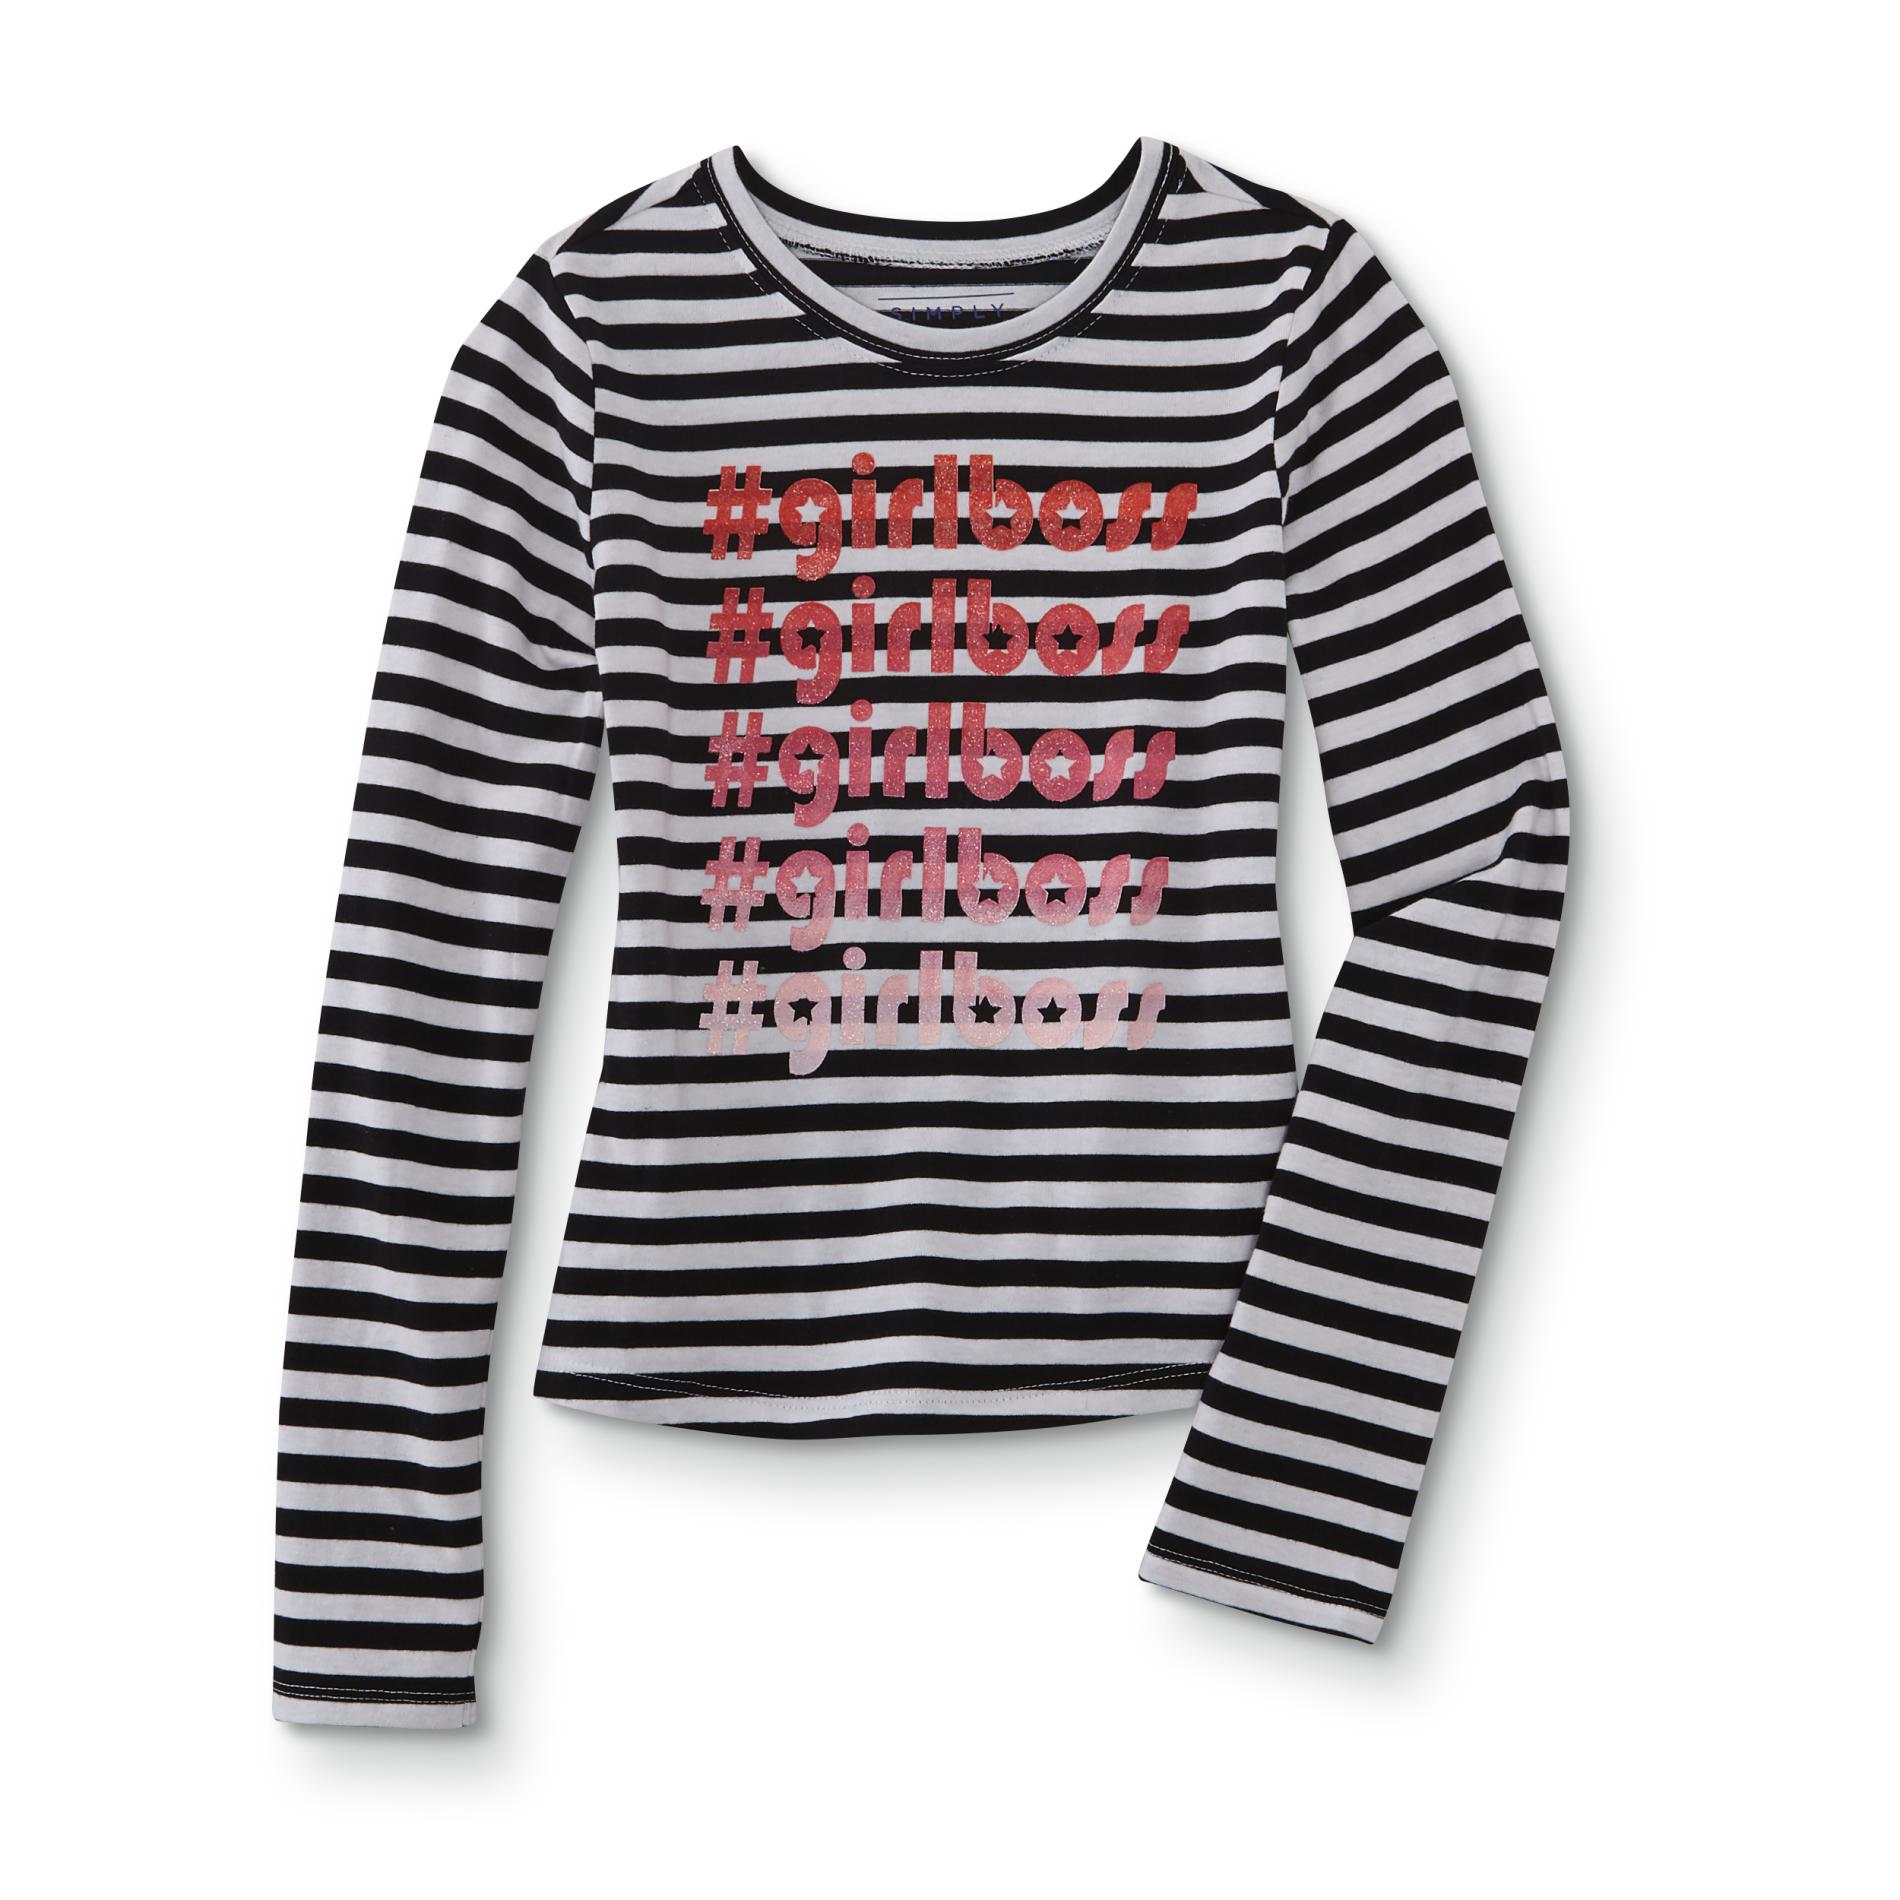 Simply Styled Girls' Long-Sleeve Graphic T-Shirt - Striped/Girl Boss